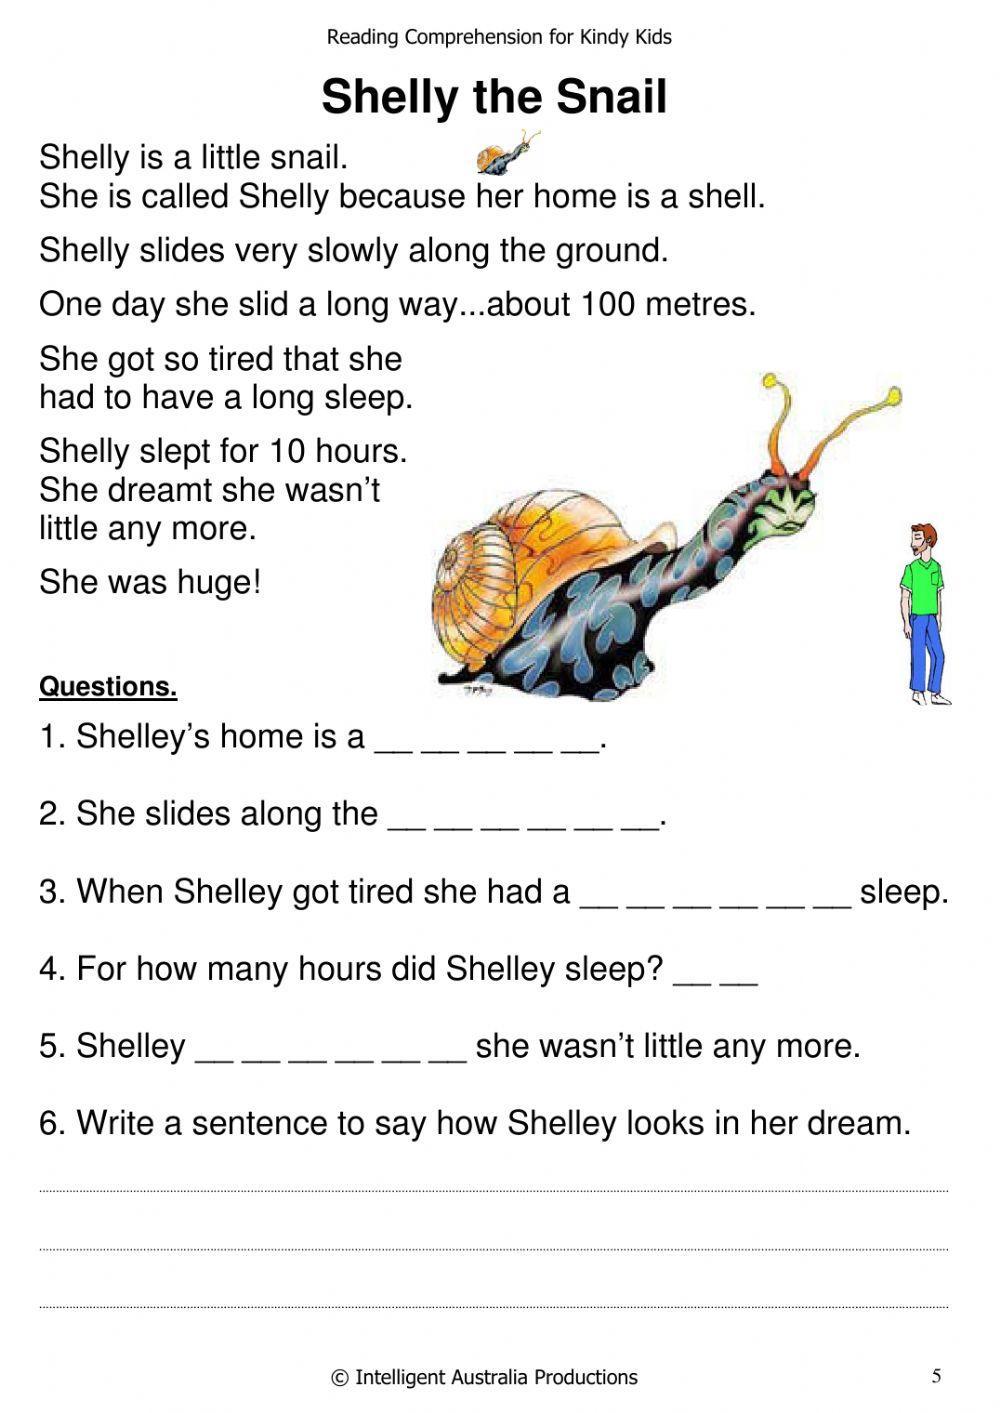 shelly the snail - Reading